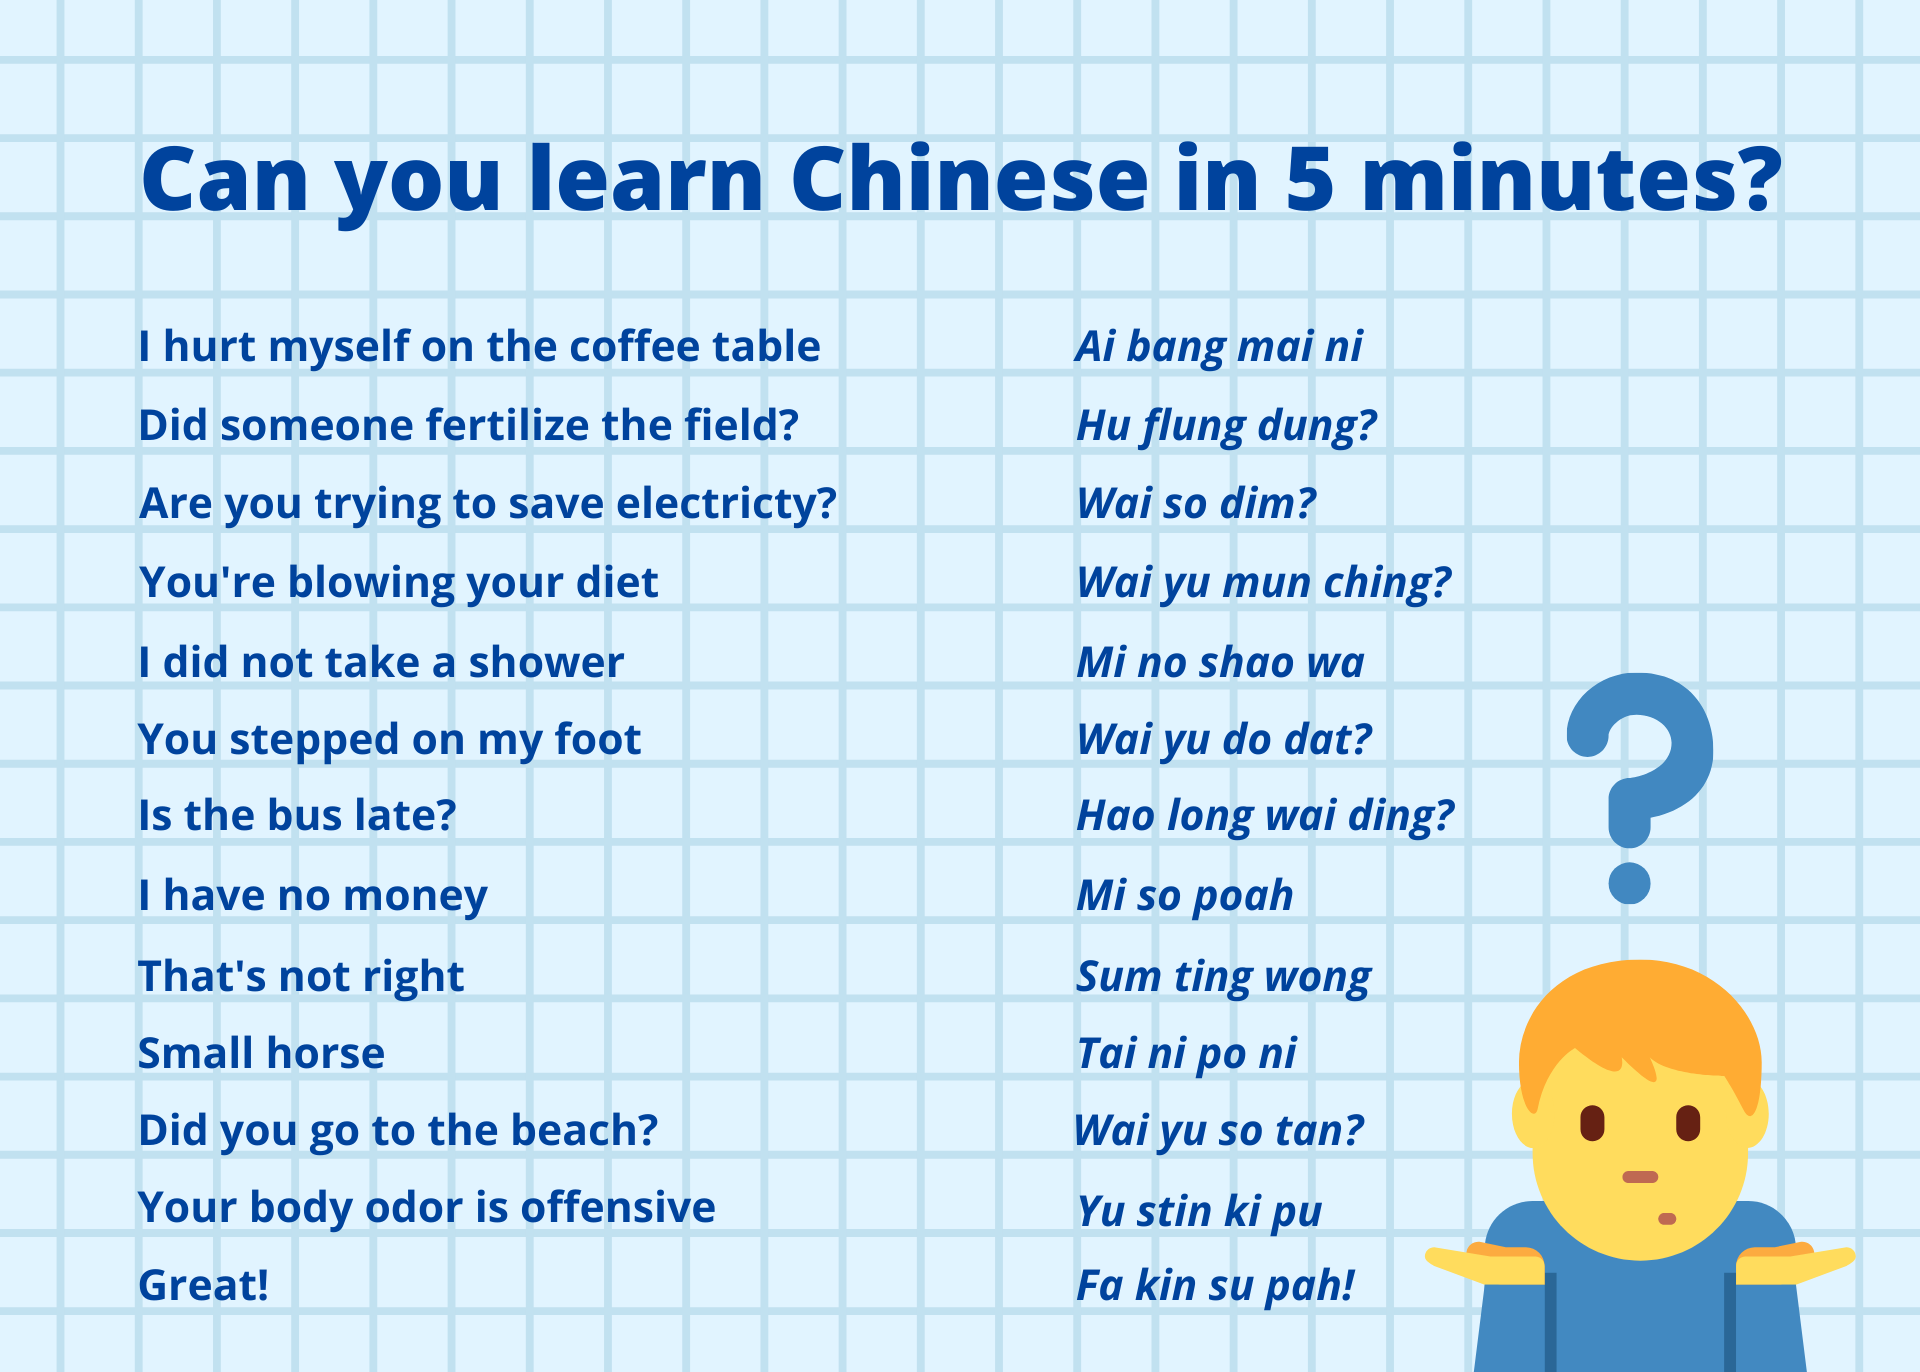 Learn Chinese in 5 minutes meme